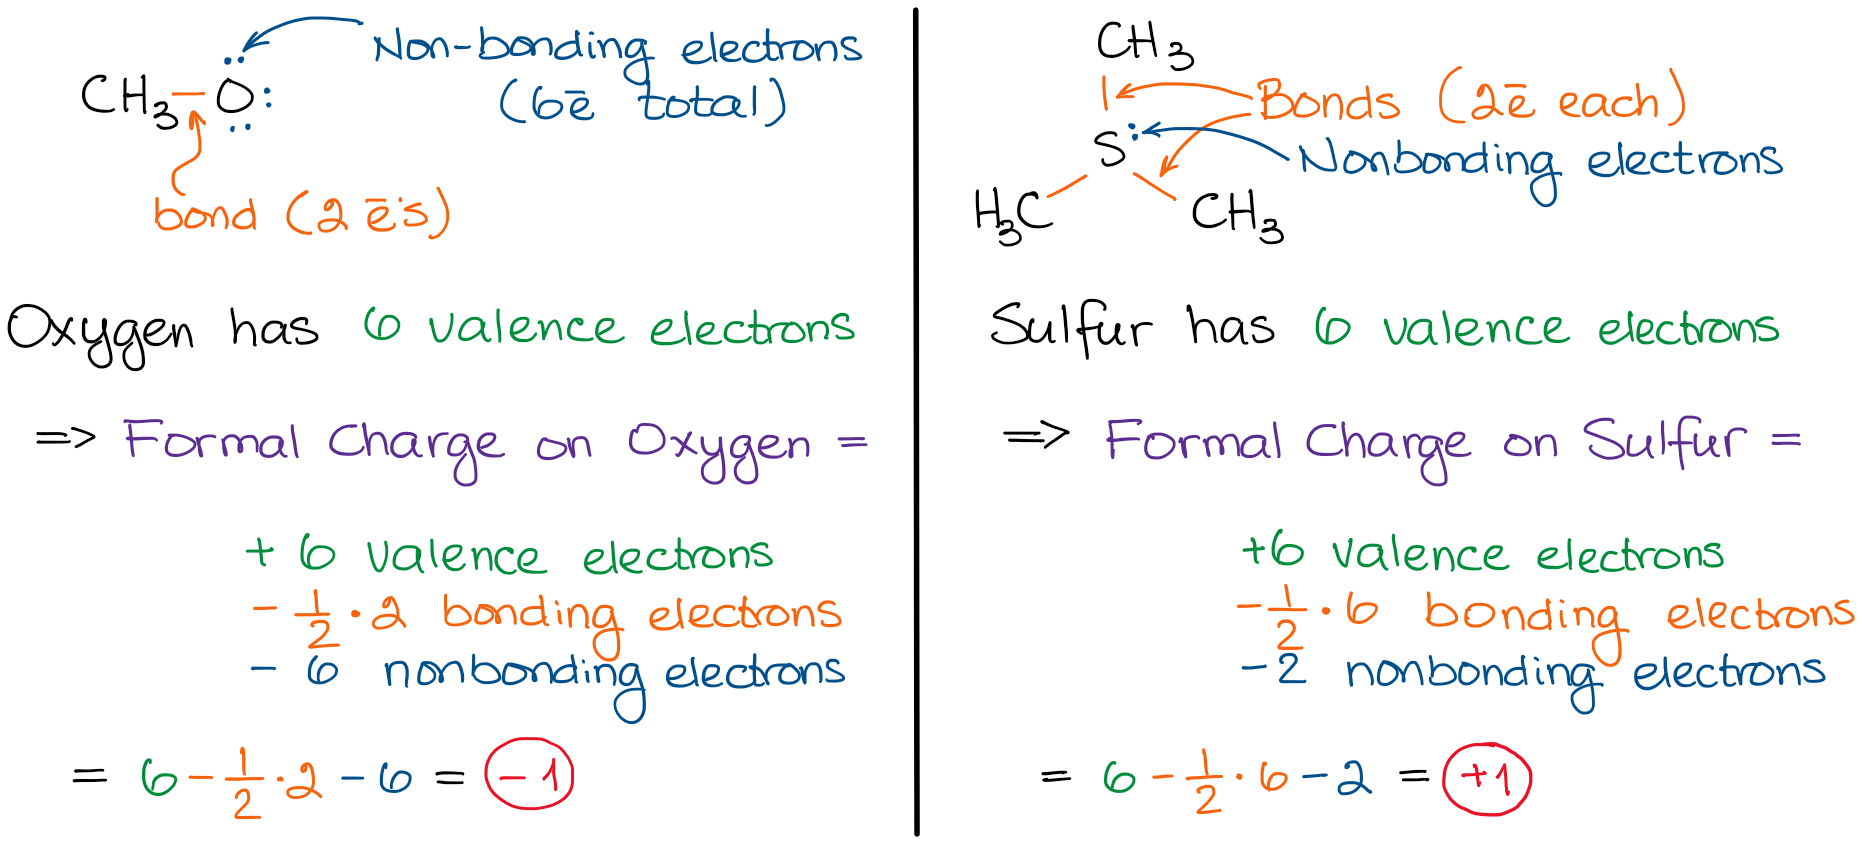 how to calculate the formal charge of o3 3